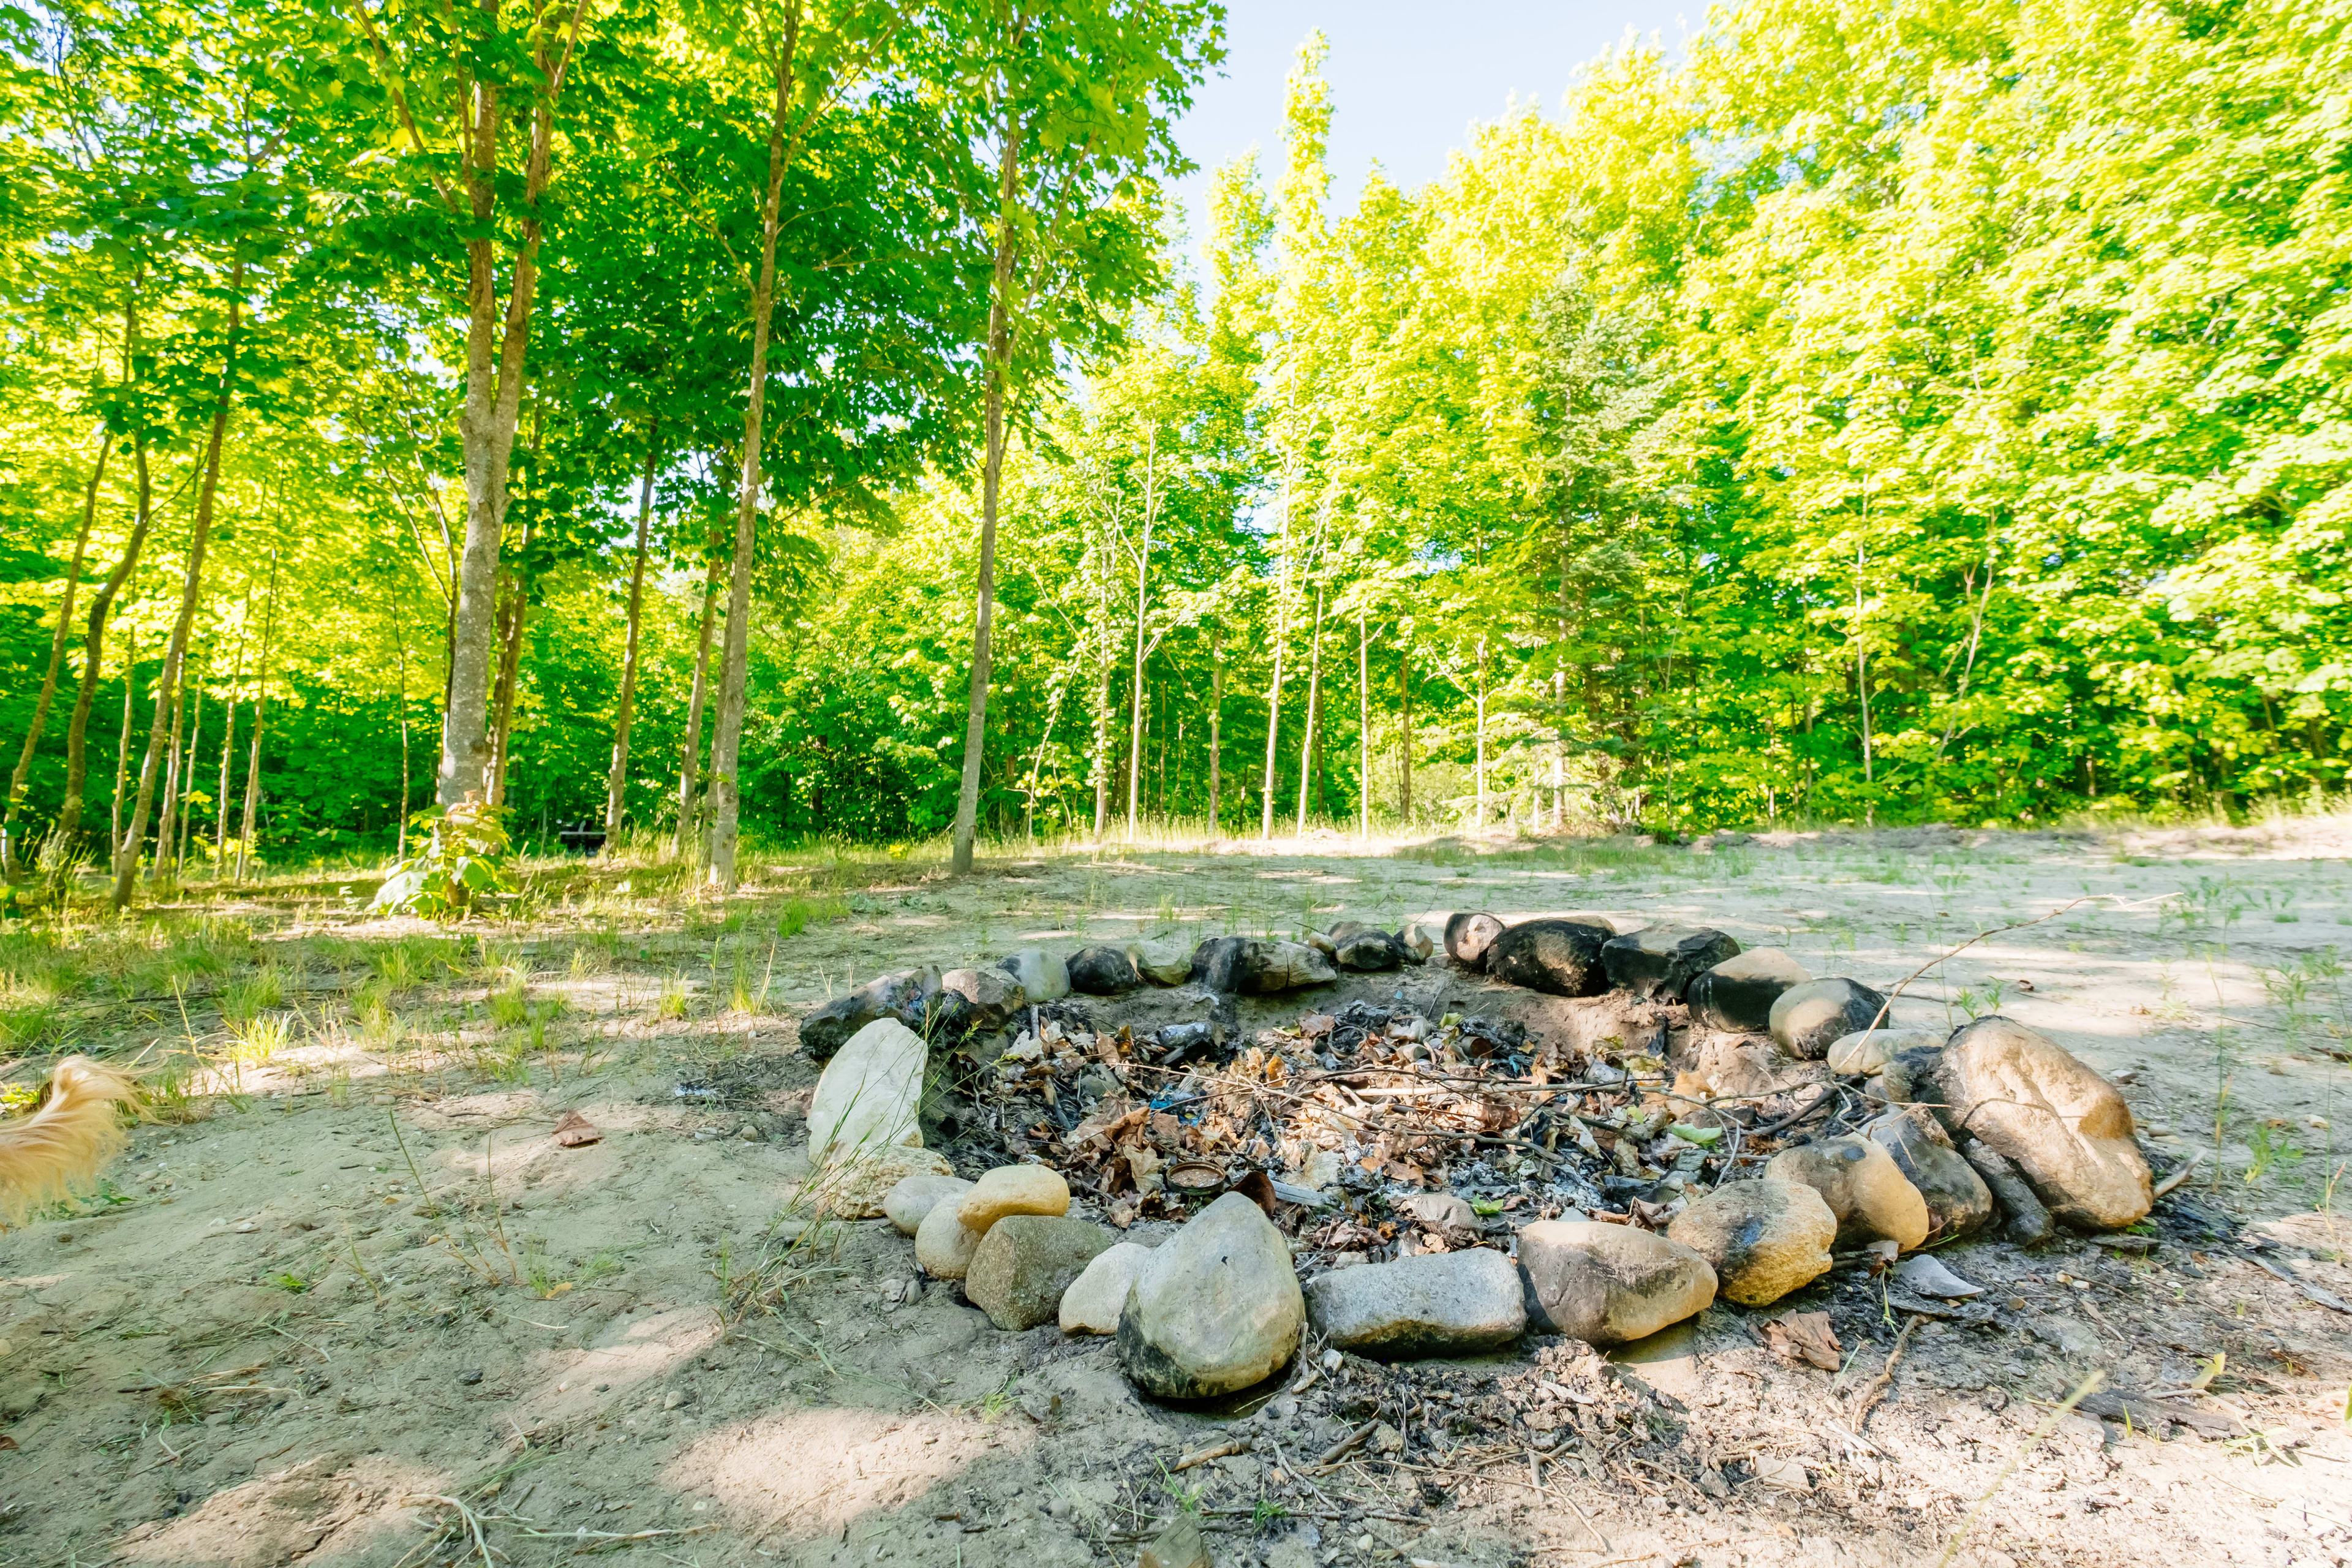 Giant fire pit